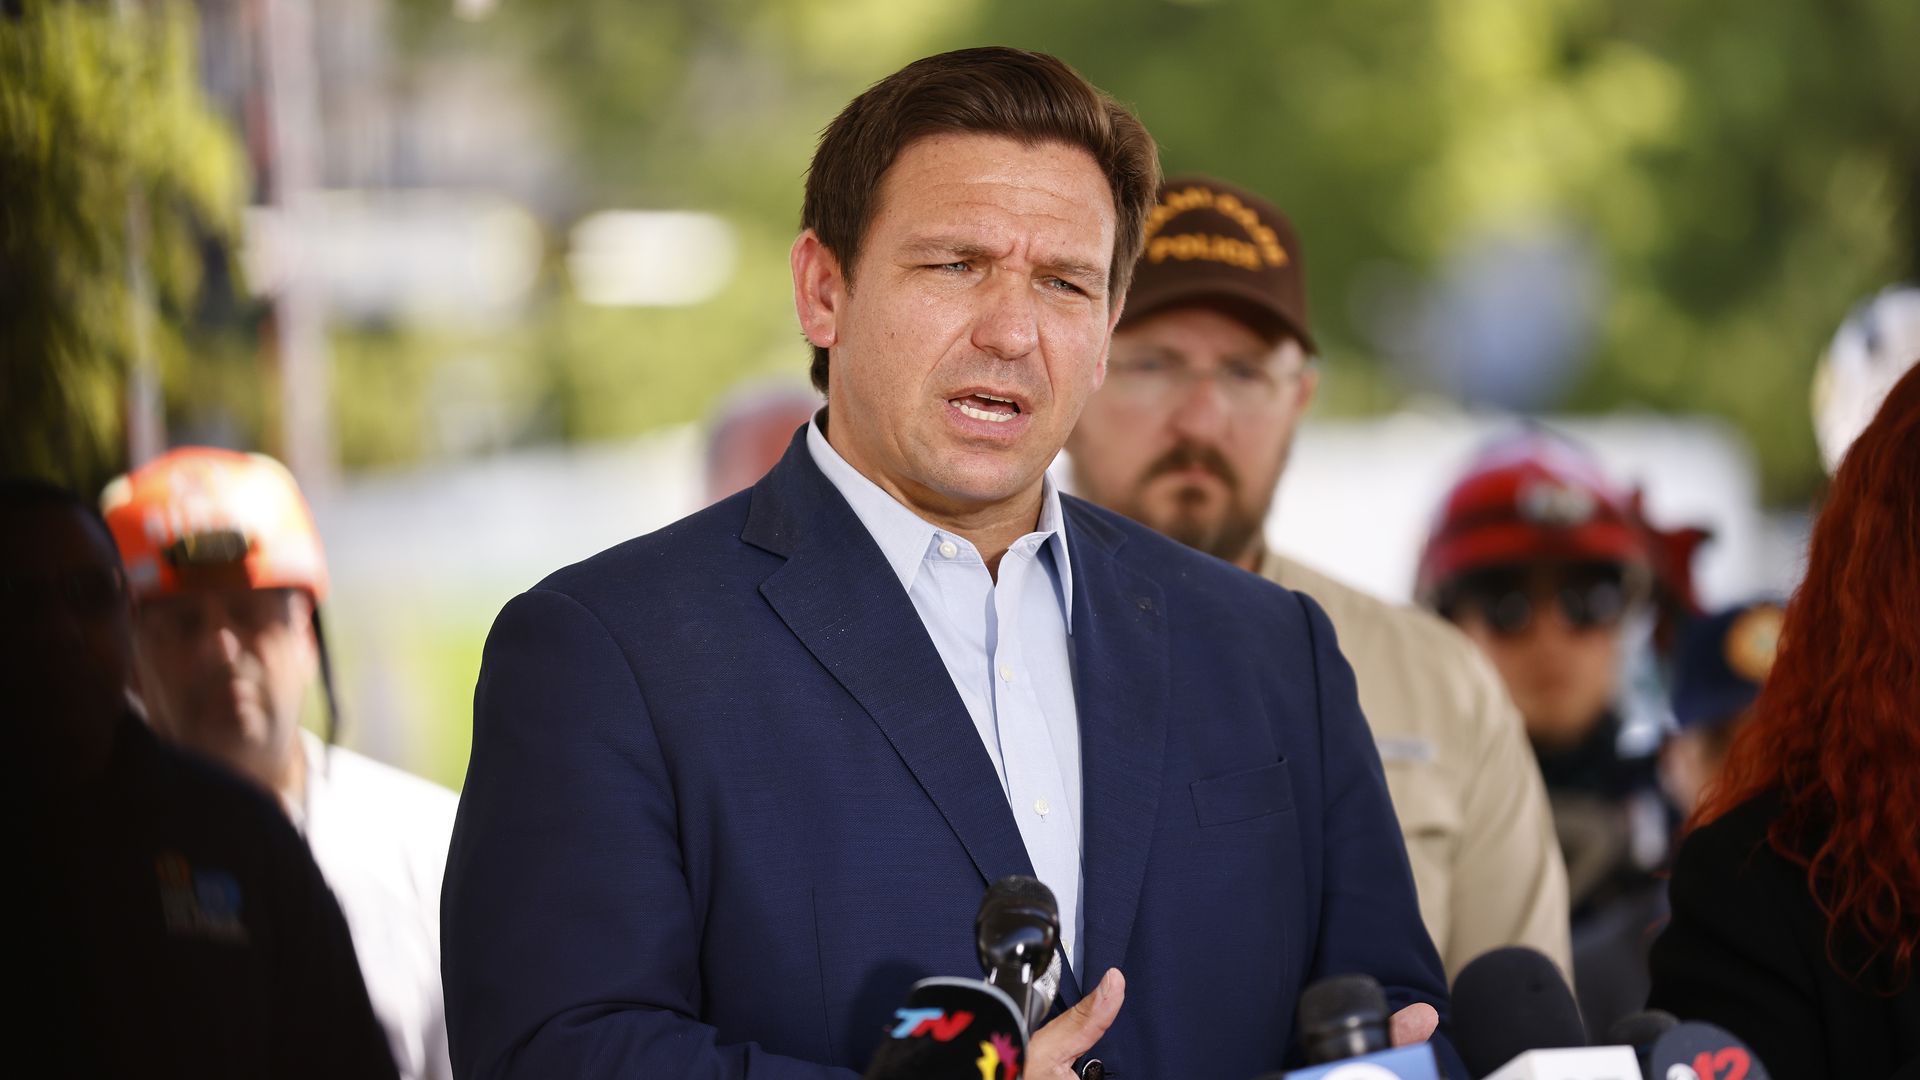 Photo of Ron DeSantis speaking before a group of microphones at an outdoors conference